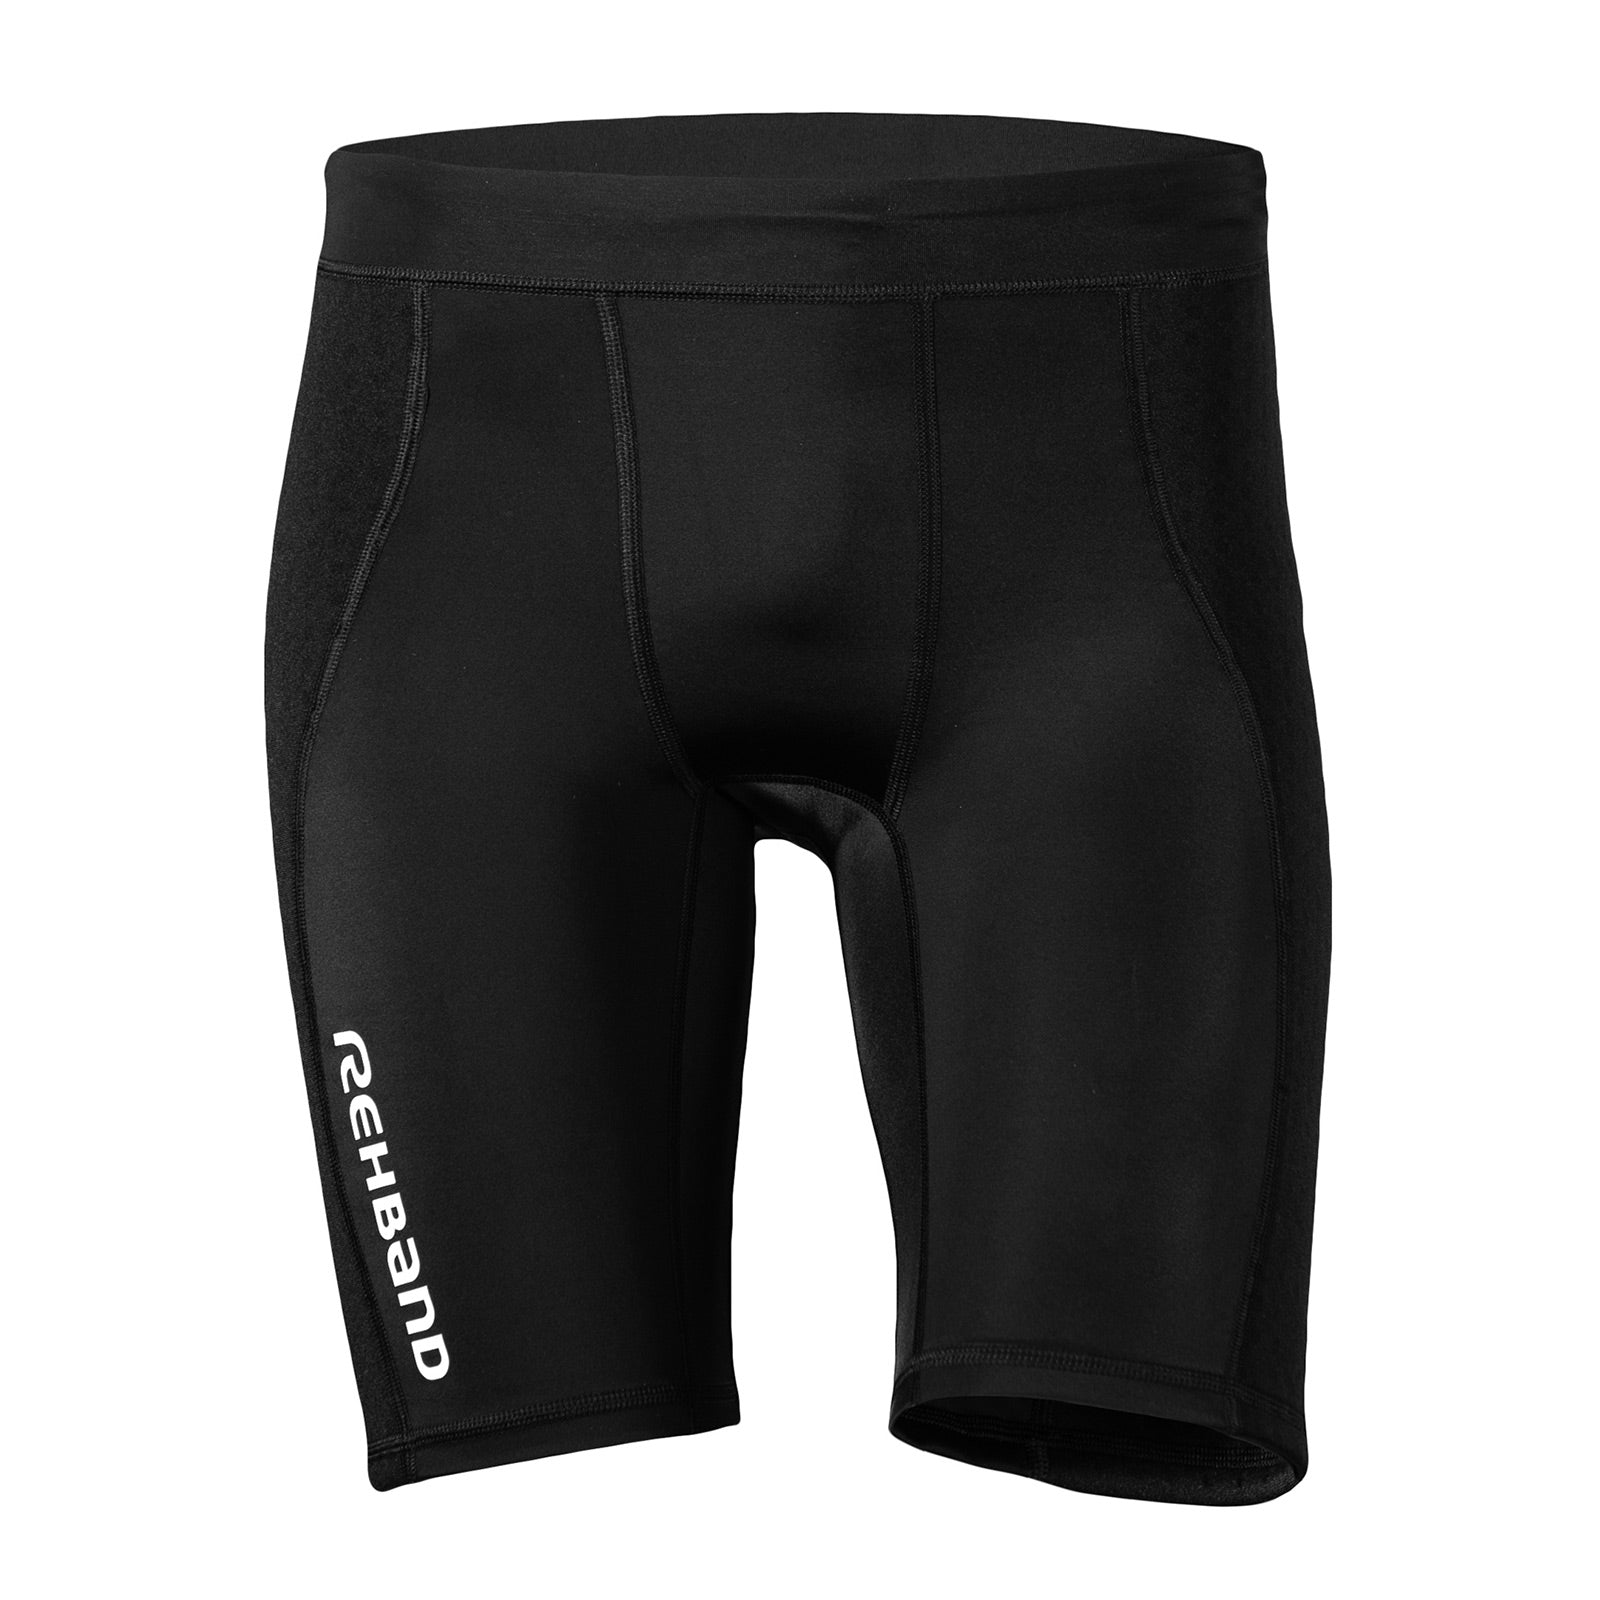 A black thermal zone shorts for men with a white Rehband lettering at the side